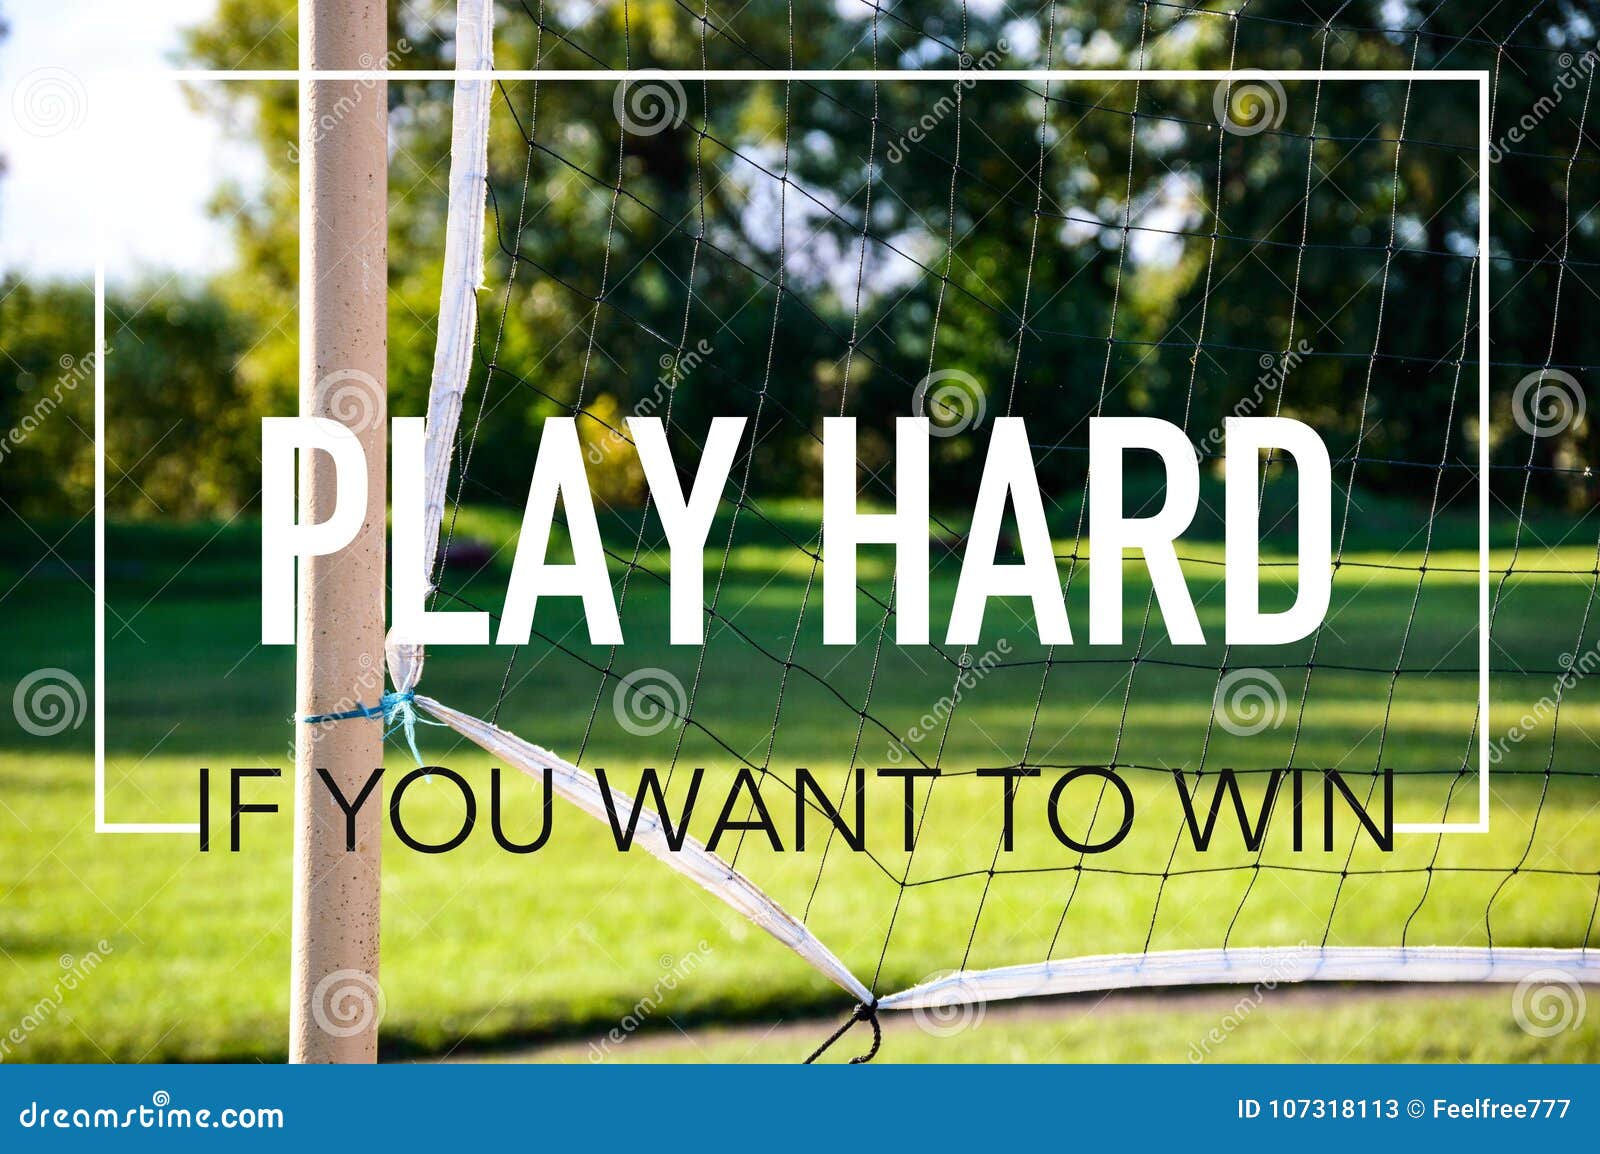 Play Hard If You Want To Win Business Quotes Stock Image Image Of Leader Leading 107318113